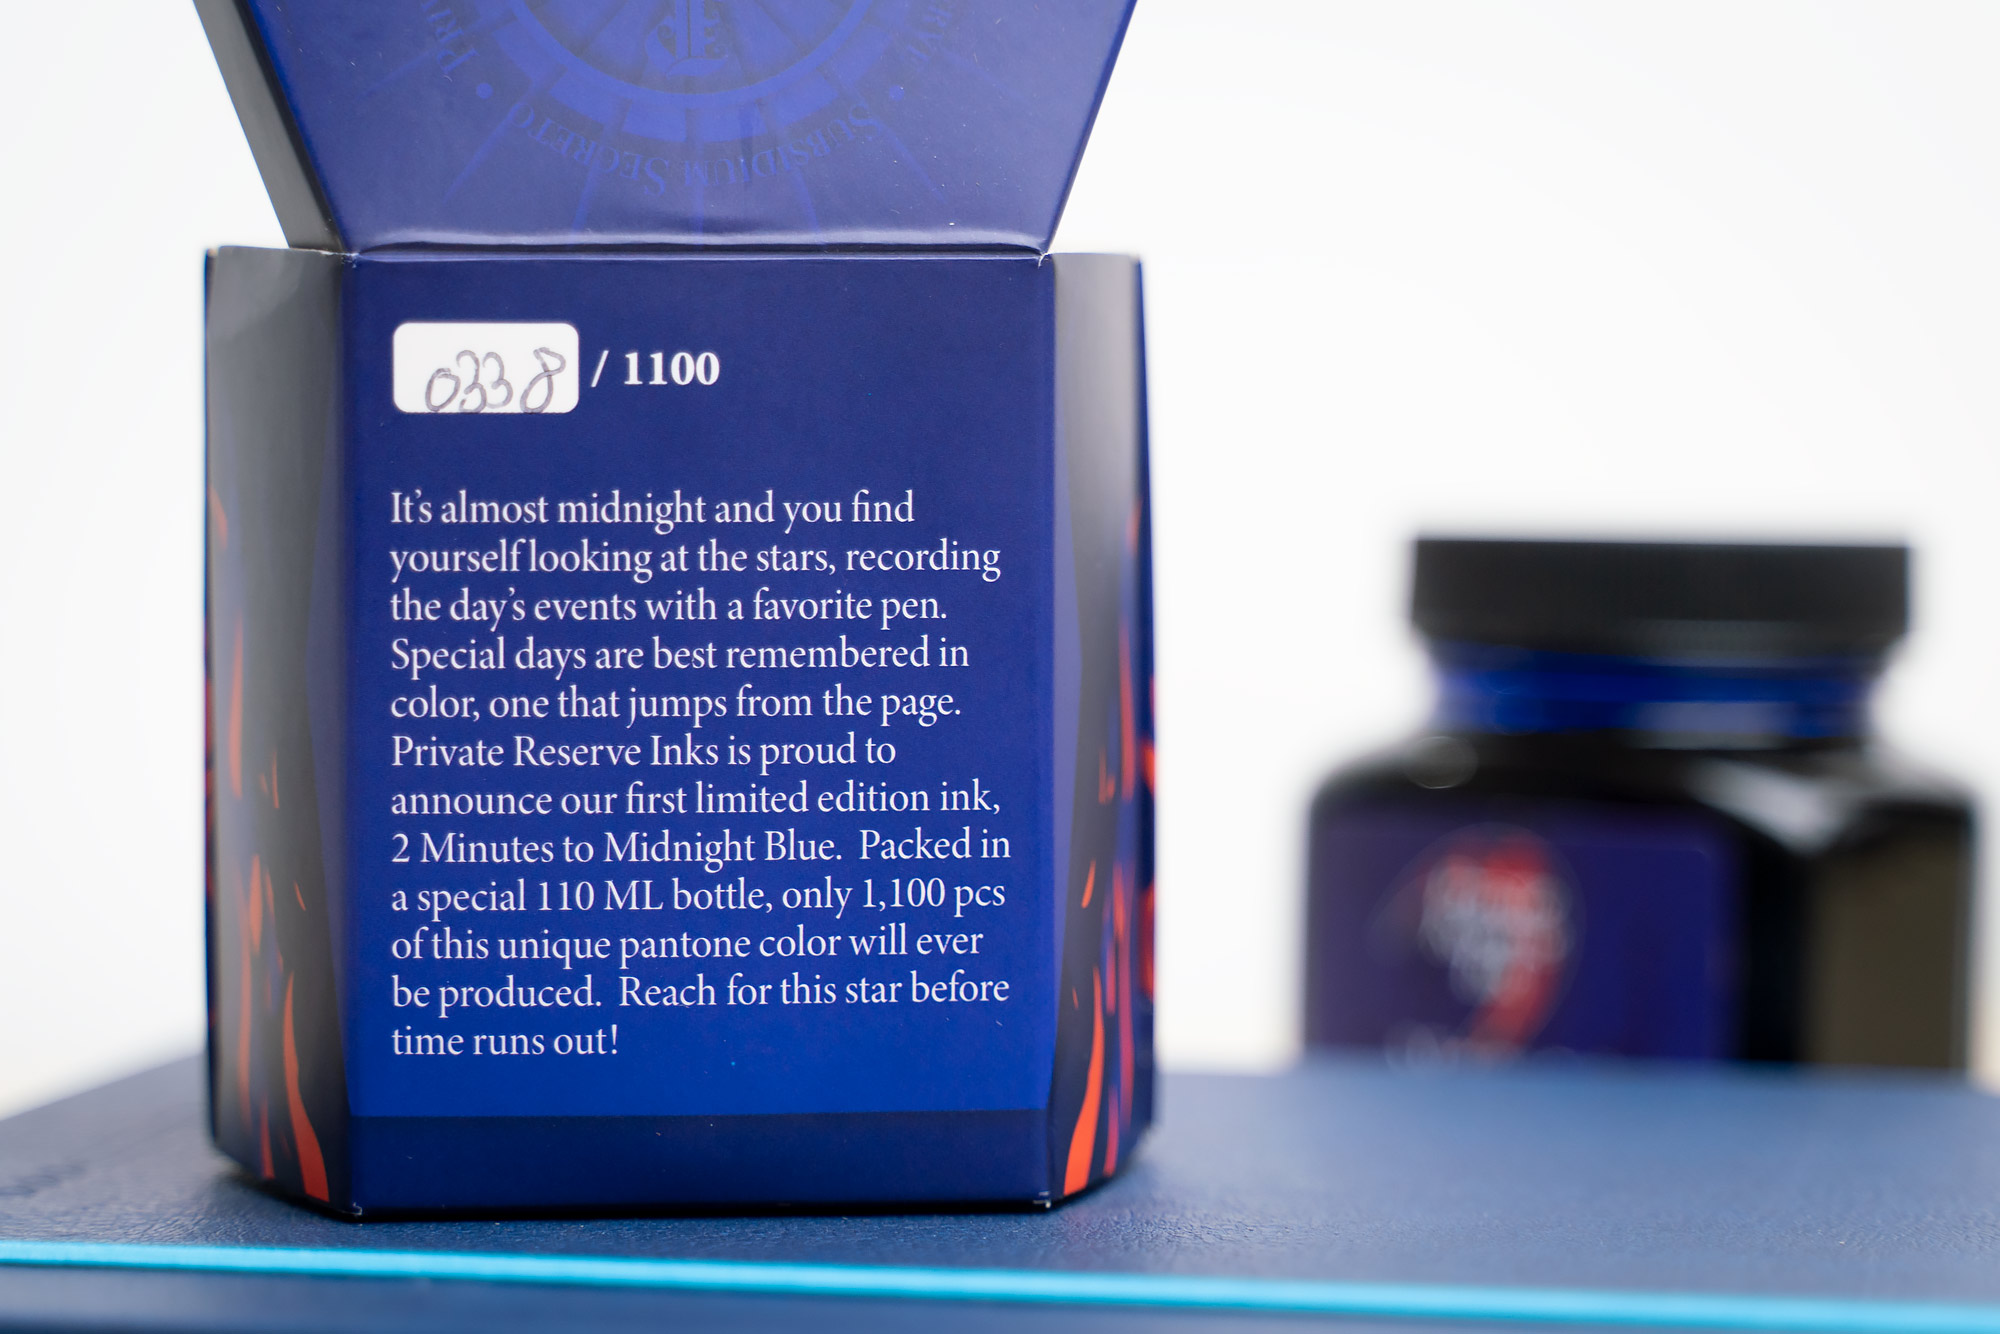 Private Reserve "2 Minutes to Midnight Blue" ink box back